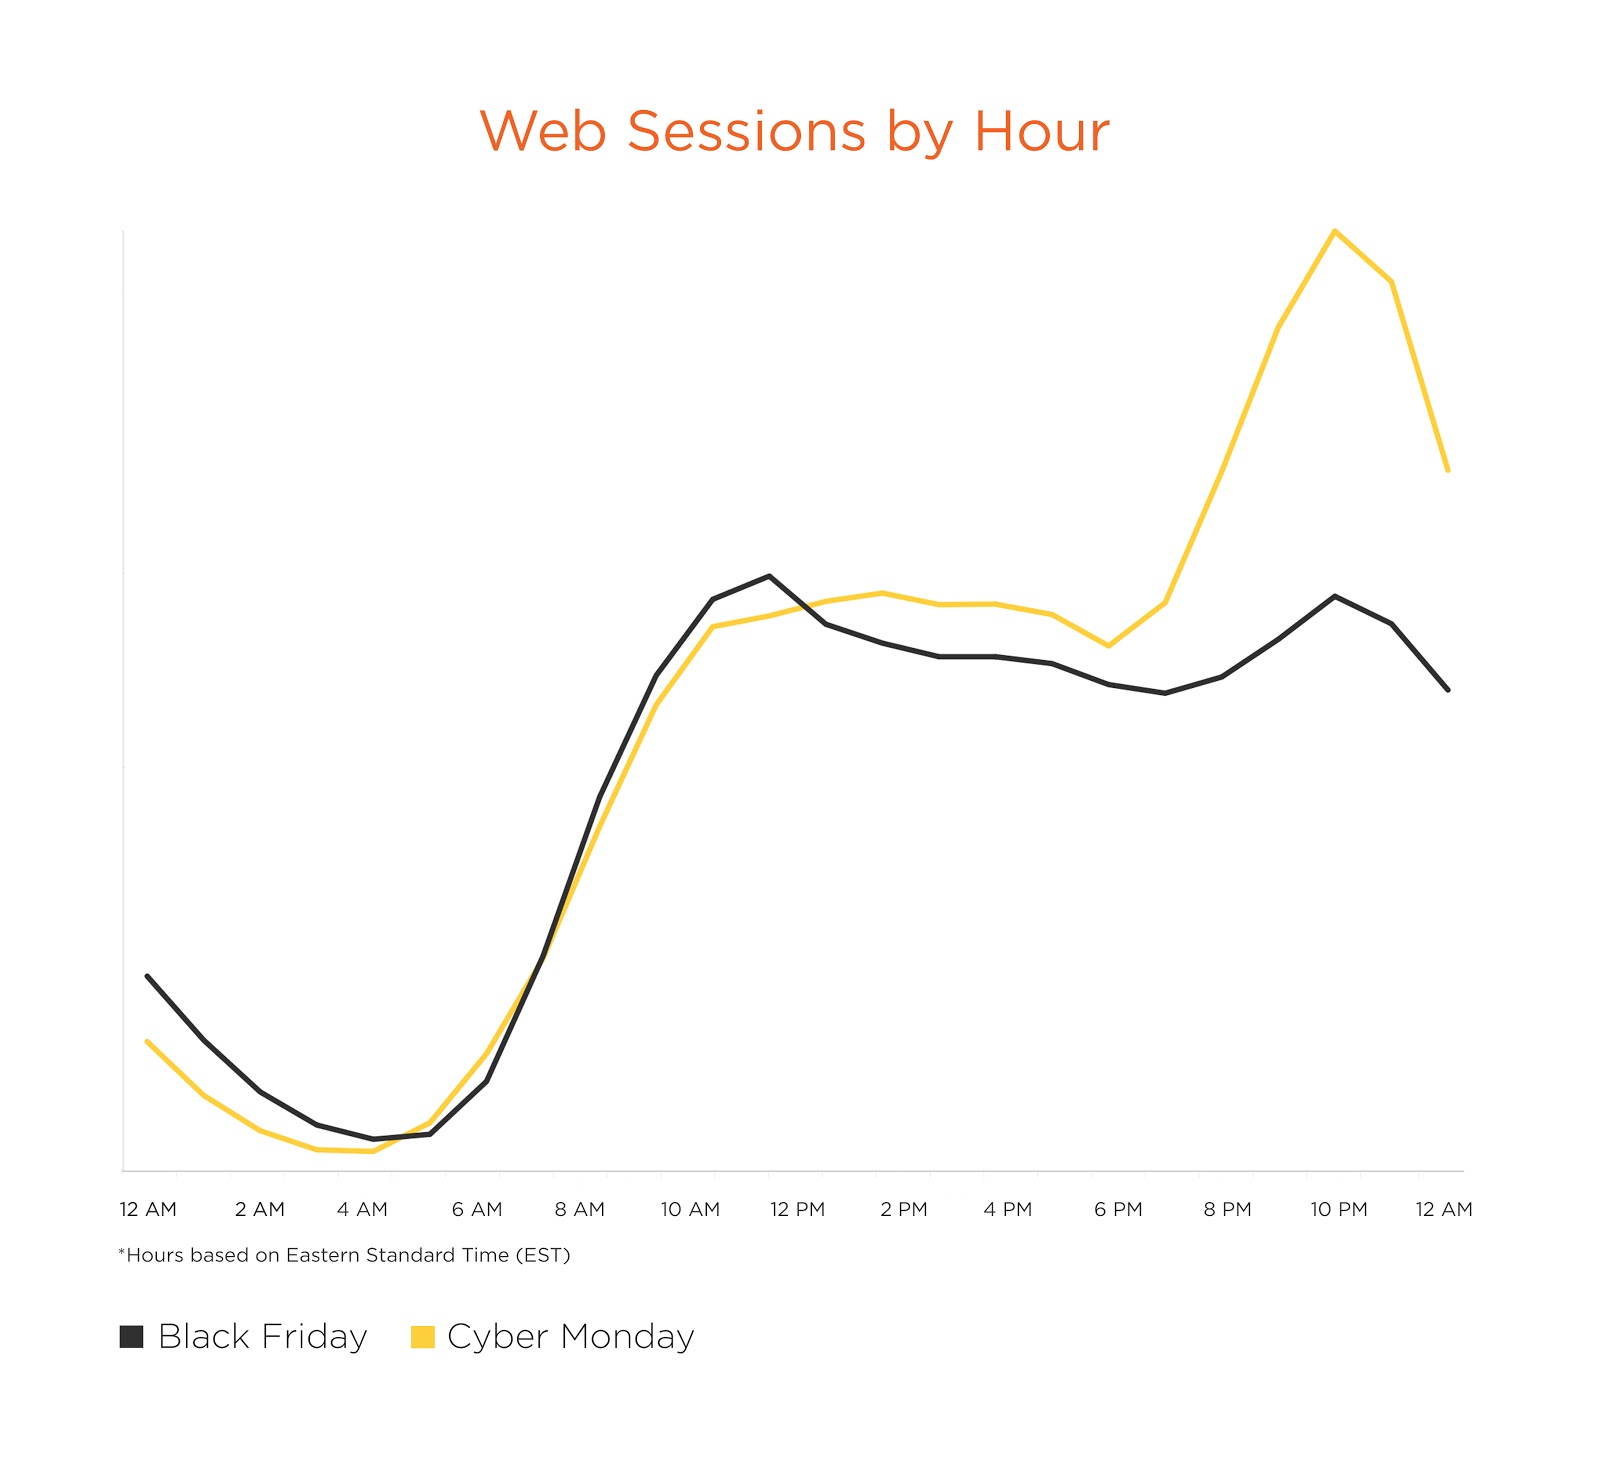 Black Friday and Cyber Monday Web Sessions by Hour